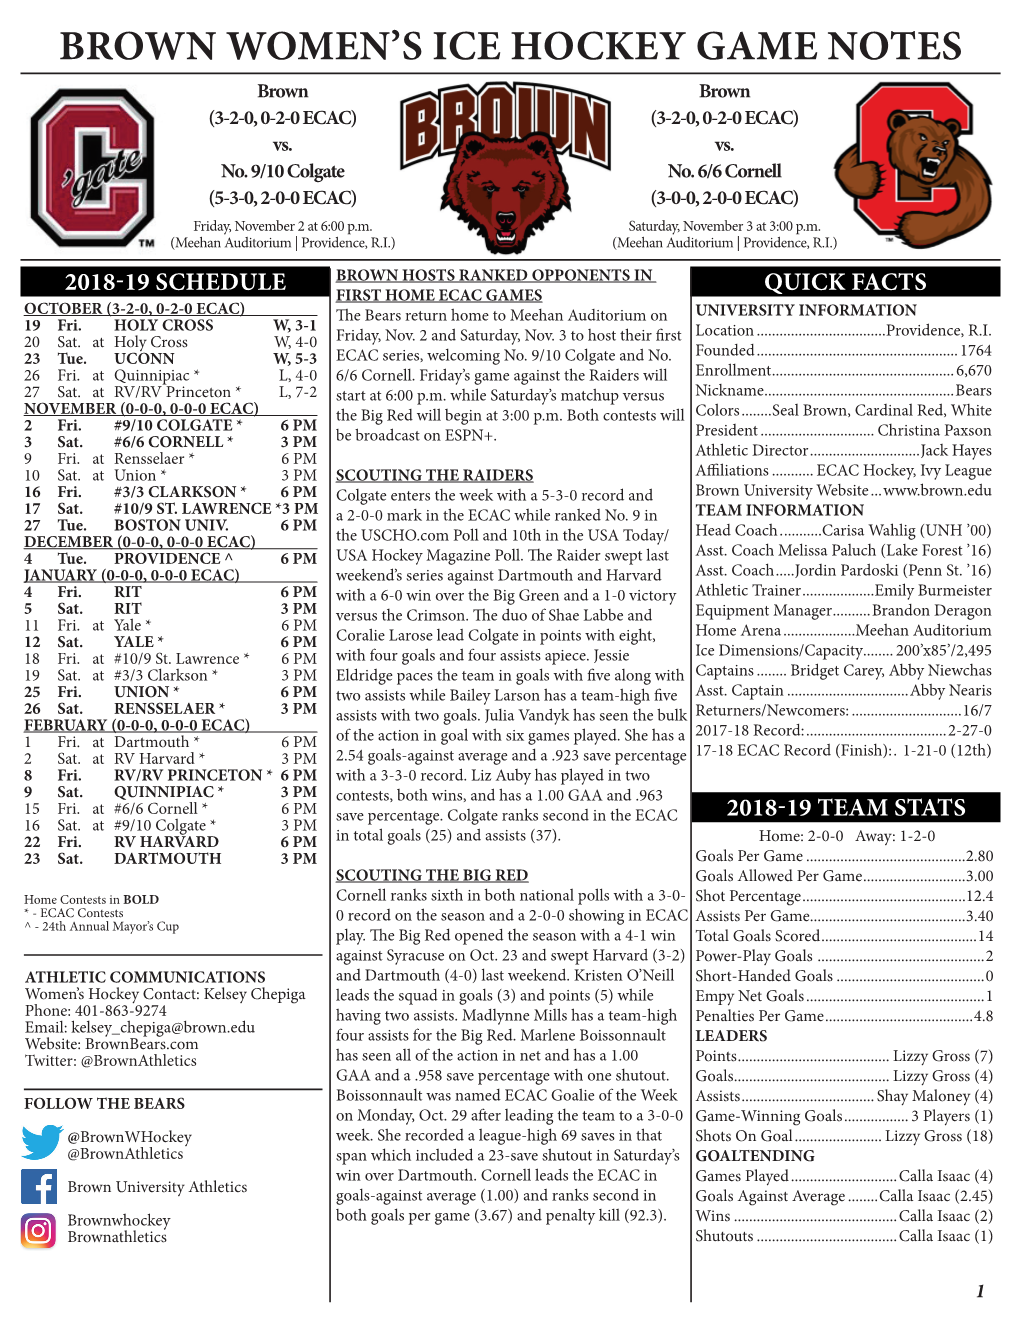 Brown Women's Ice Hockey Game Notes